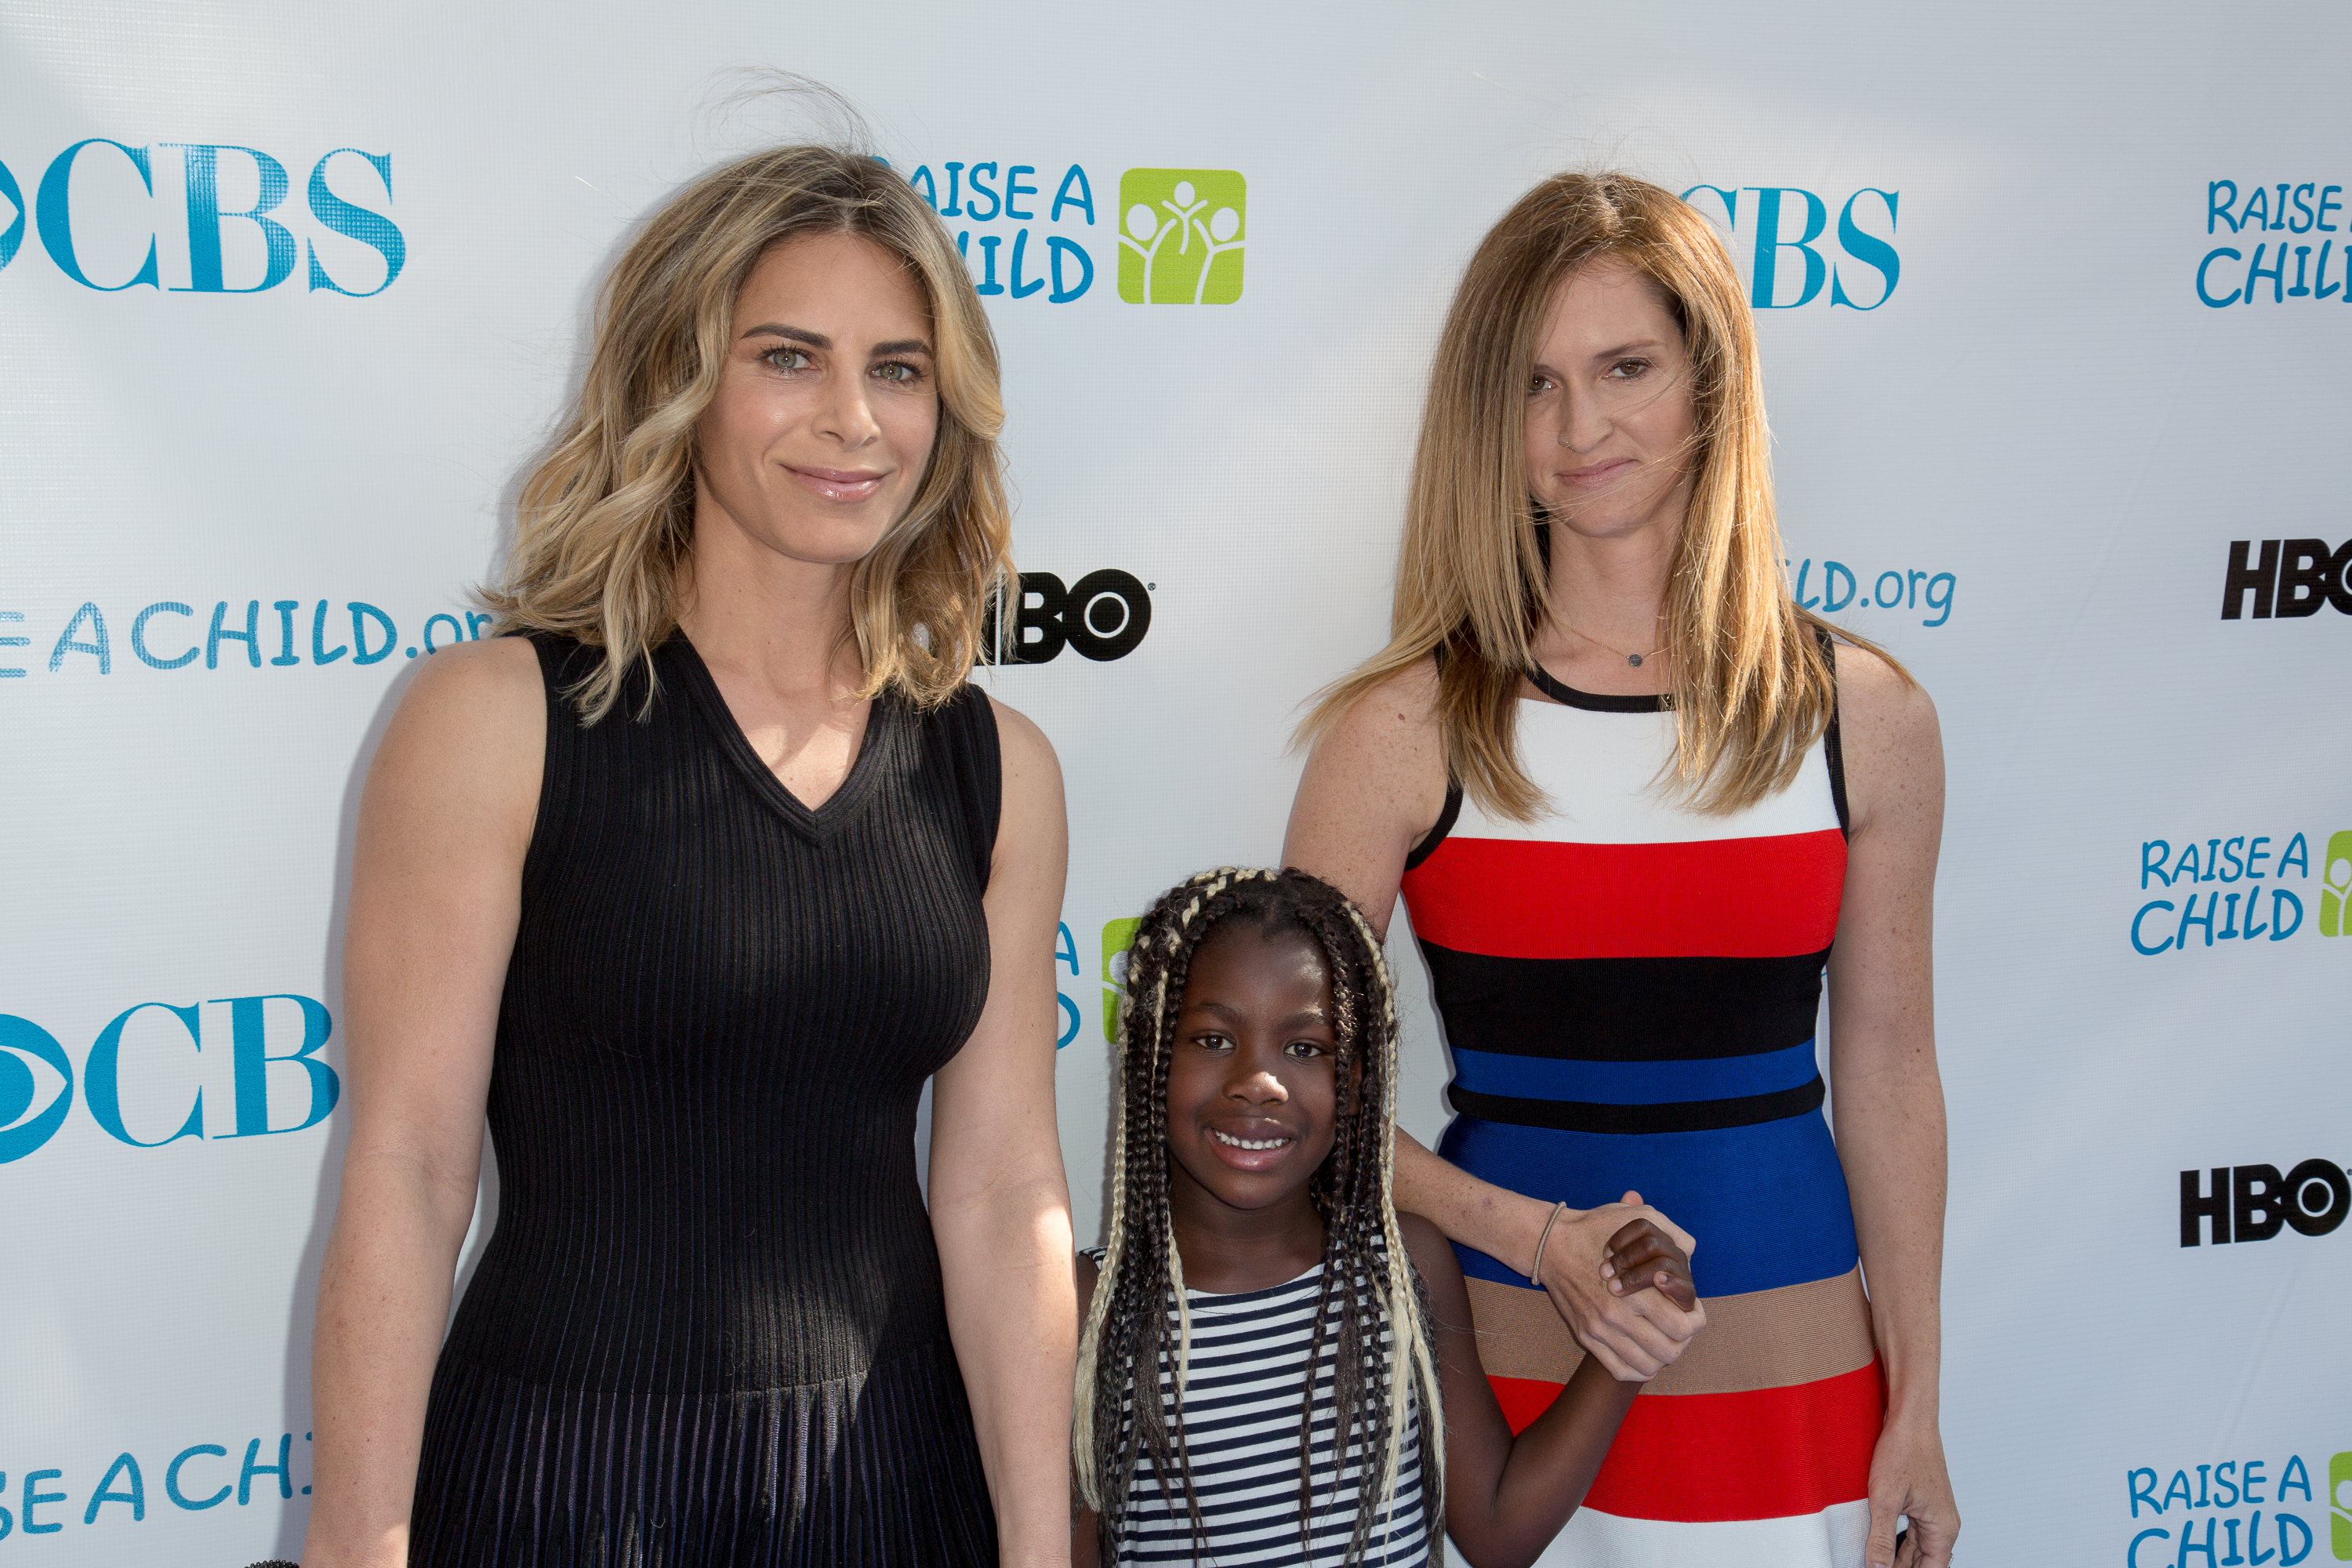 Jillian Michaels, Heidi Rhoades, and Lukensia Michaels-Rhoades are pictured at the 4th Annual RaiseAChild Honors Gala at Jim Henson Studios on May 1, 2016, in Hollywood, California | Source: Getty Images